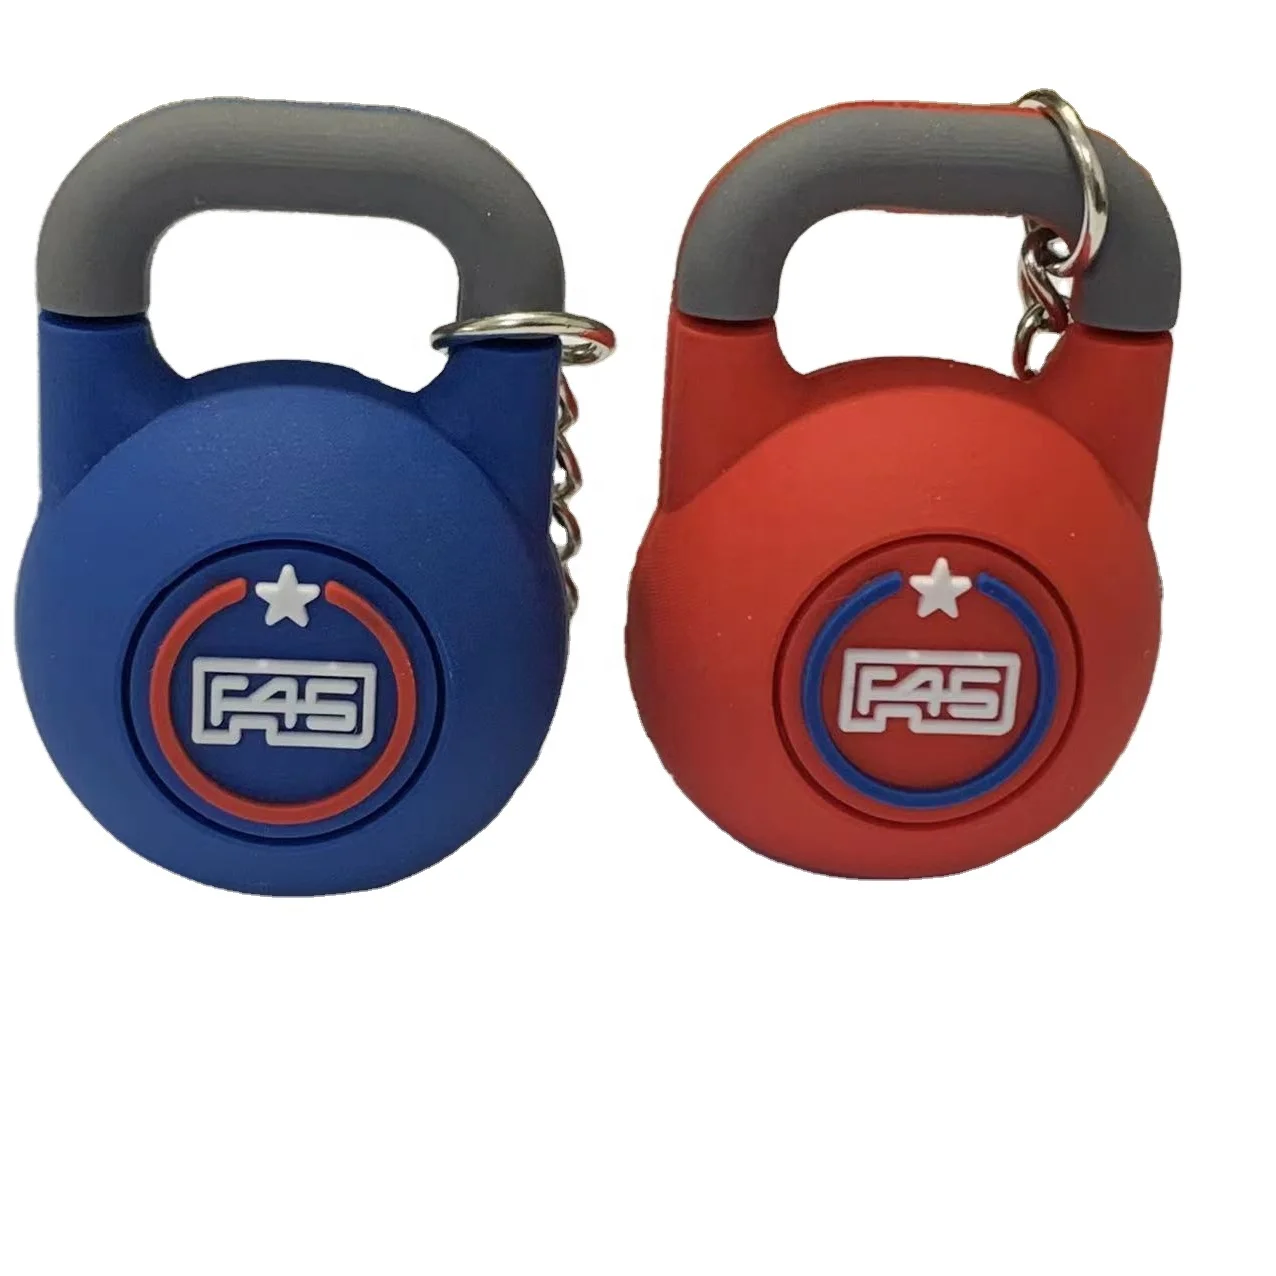 Infinity Collection Kettlebell Keychain, Workout Gifts, Fitness